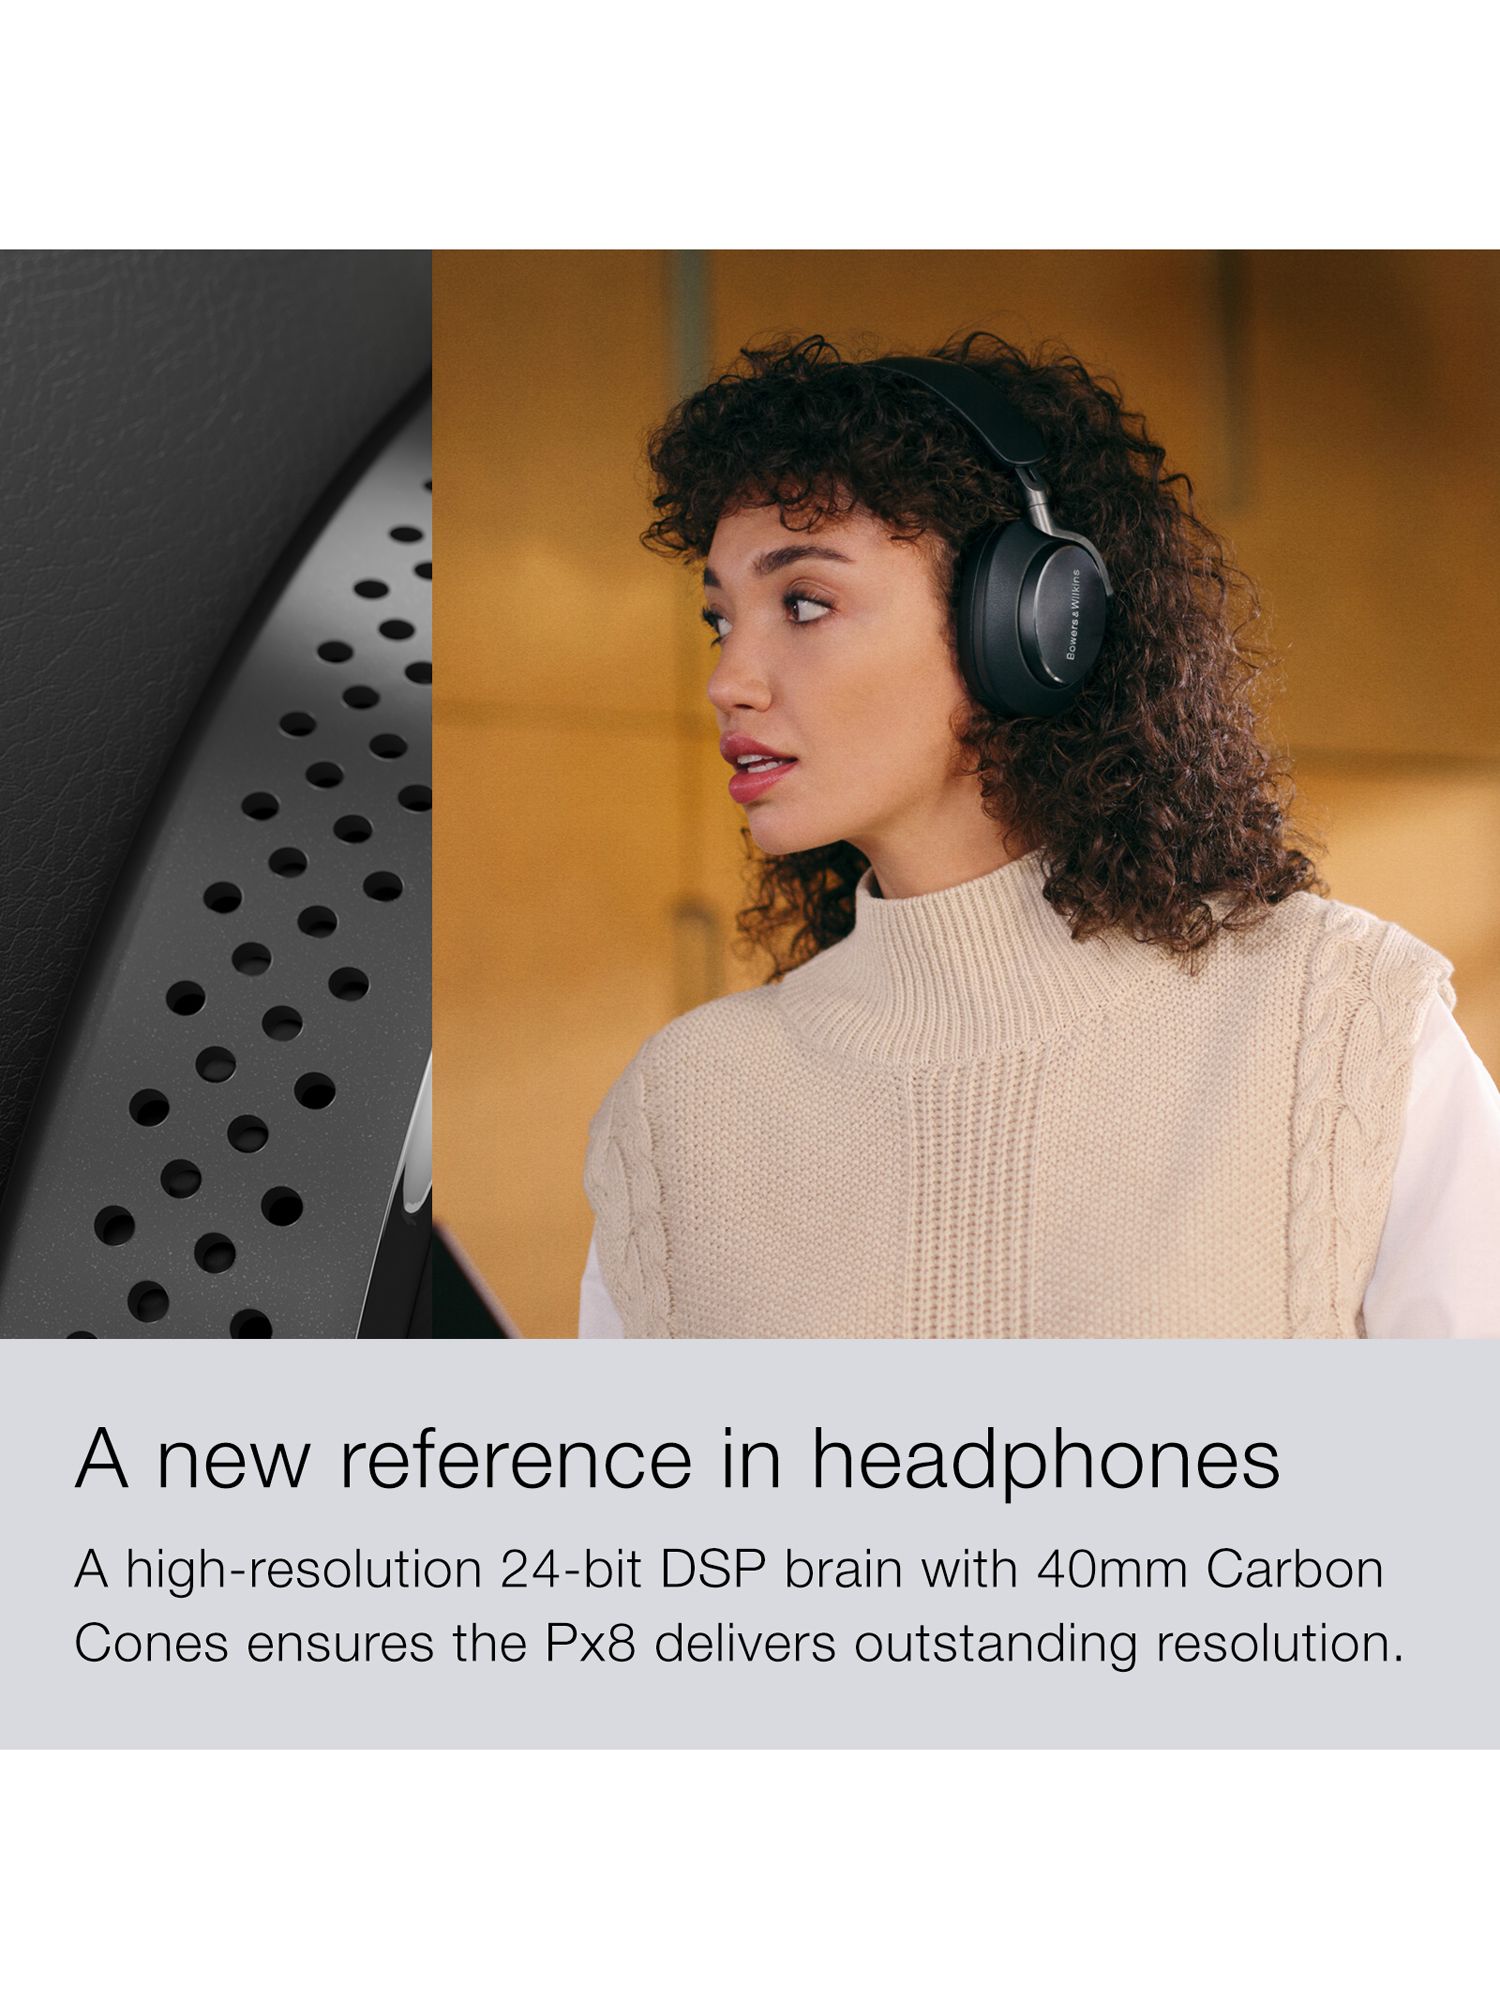 Bowers & Wilkins Gives Their Px8 Headphones Royal Treatment